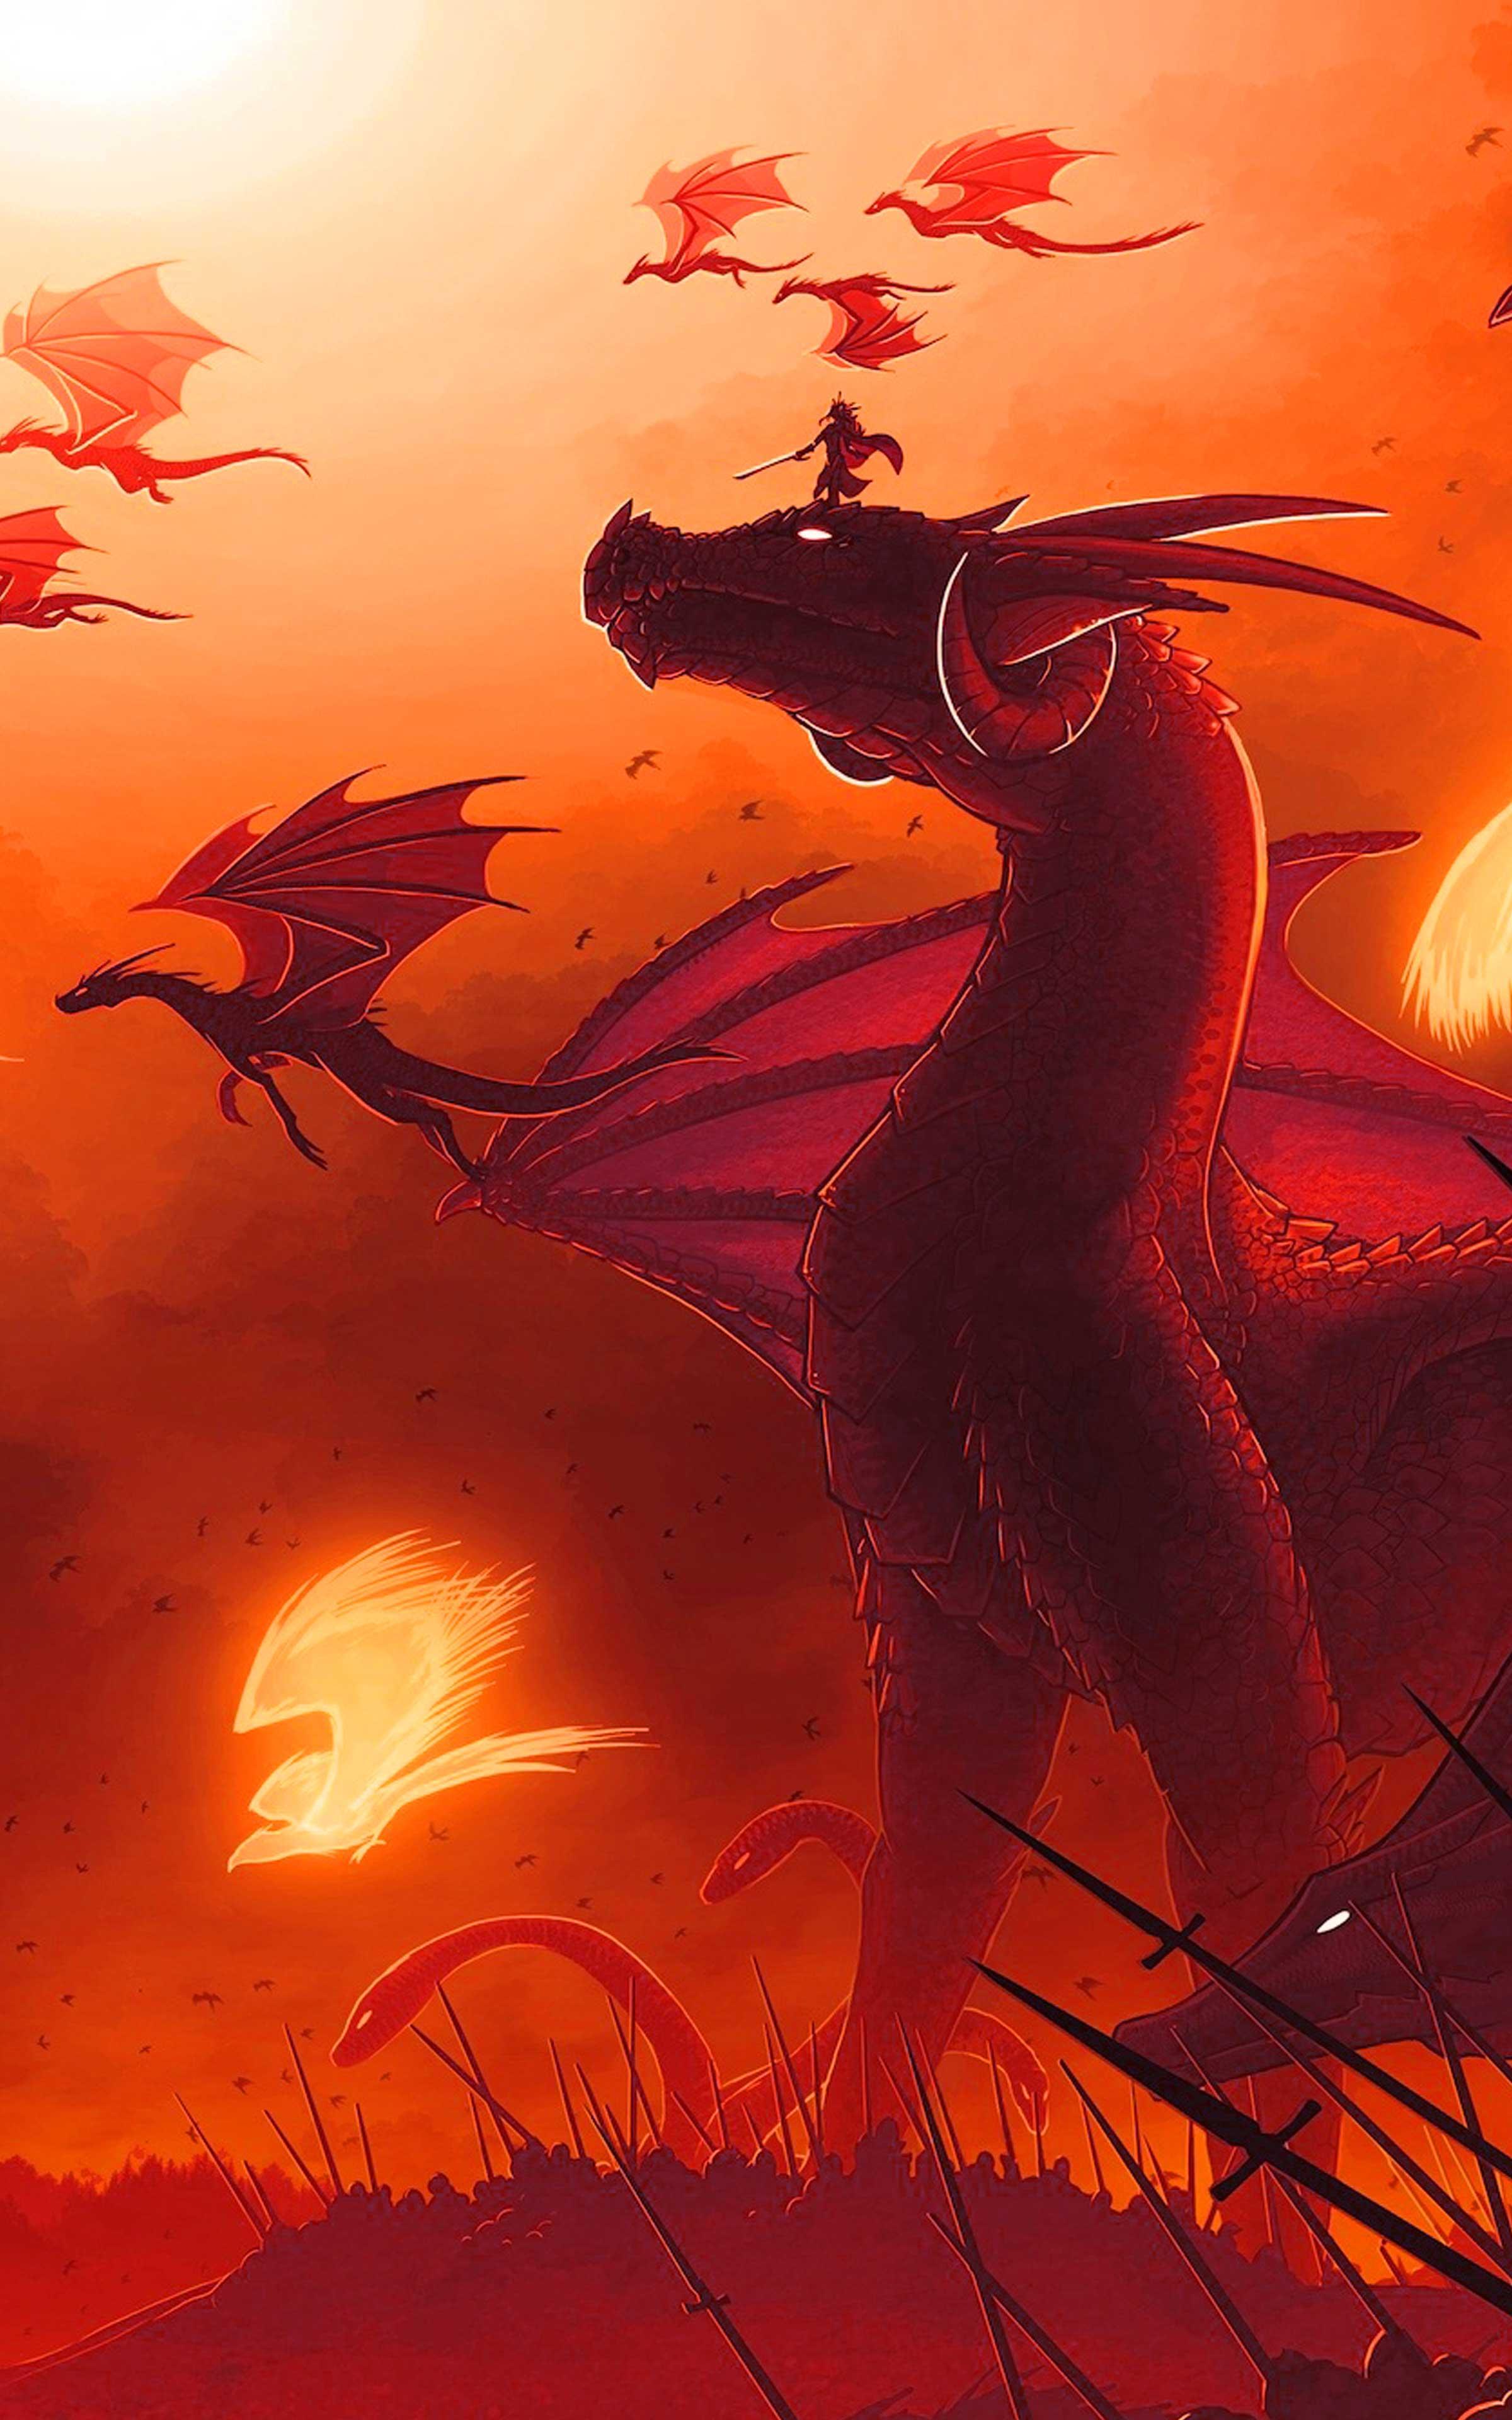 Dragon Wallpaper Cool Dragon Wallpaper for Android